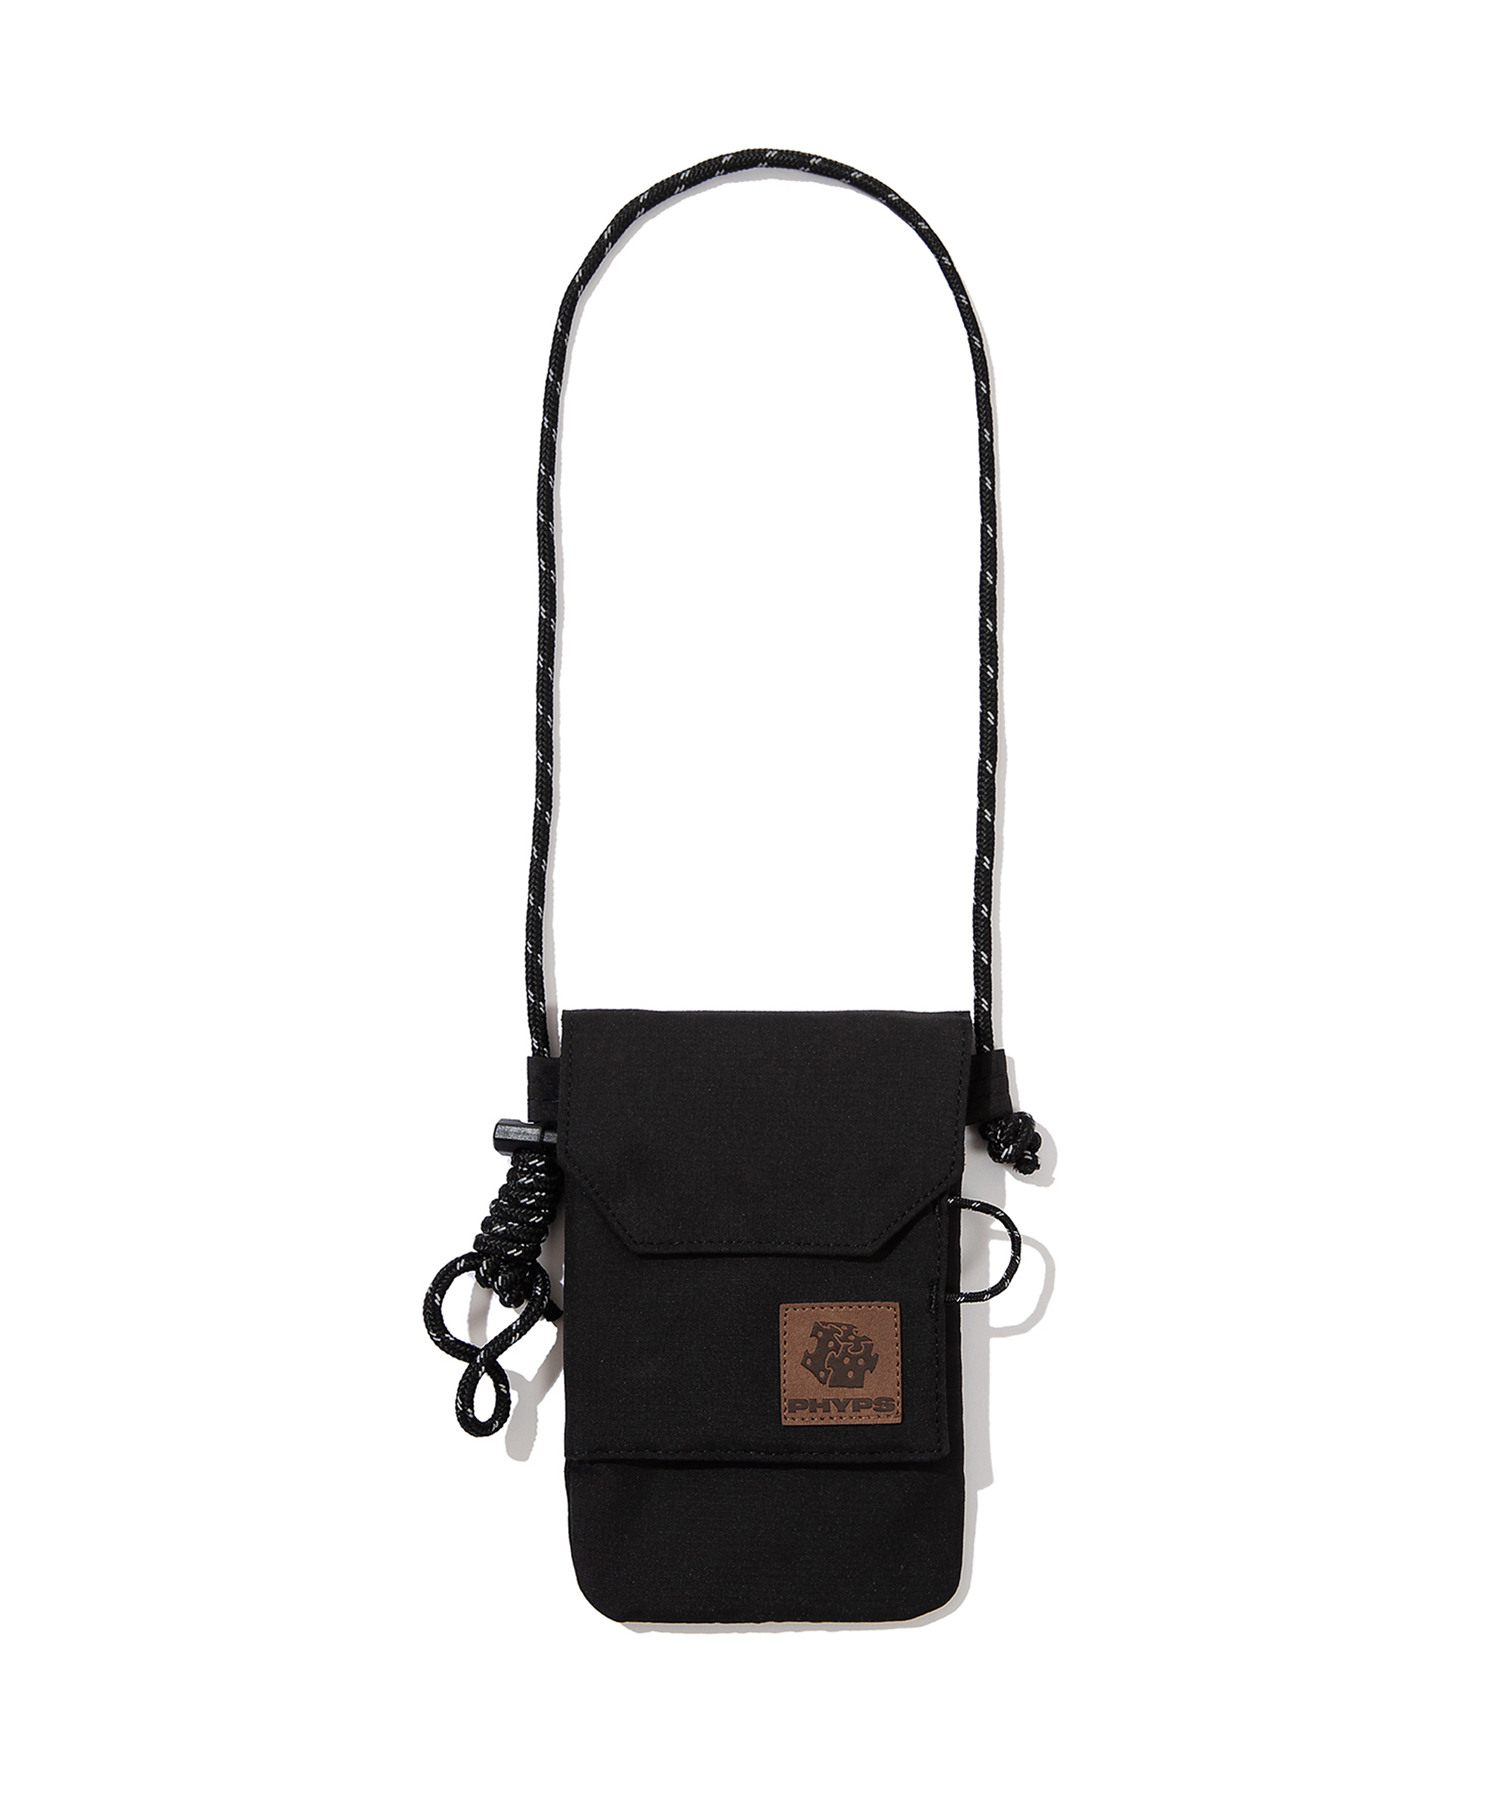 PHYPS® DOUBLE LABEL LEATHER SMALL BAG